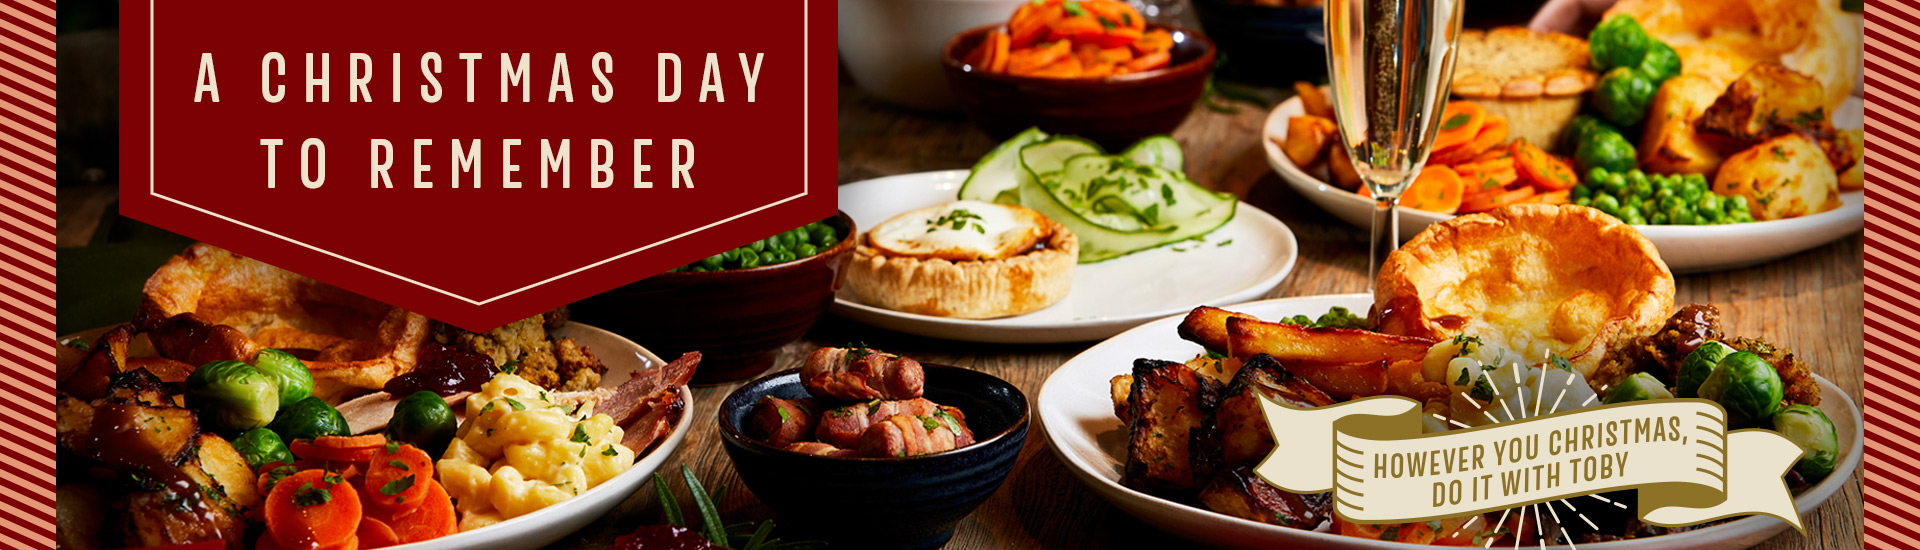 Christmas Day menu at Toby Carvery Castle Bromwich